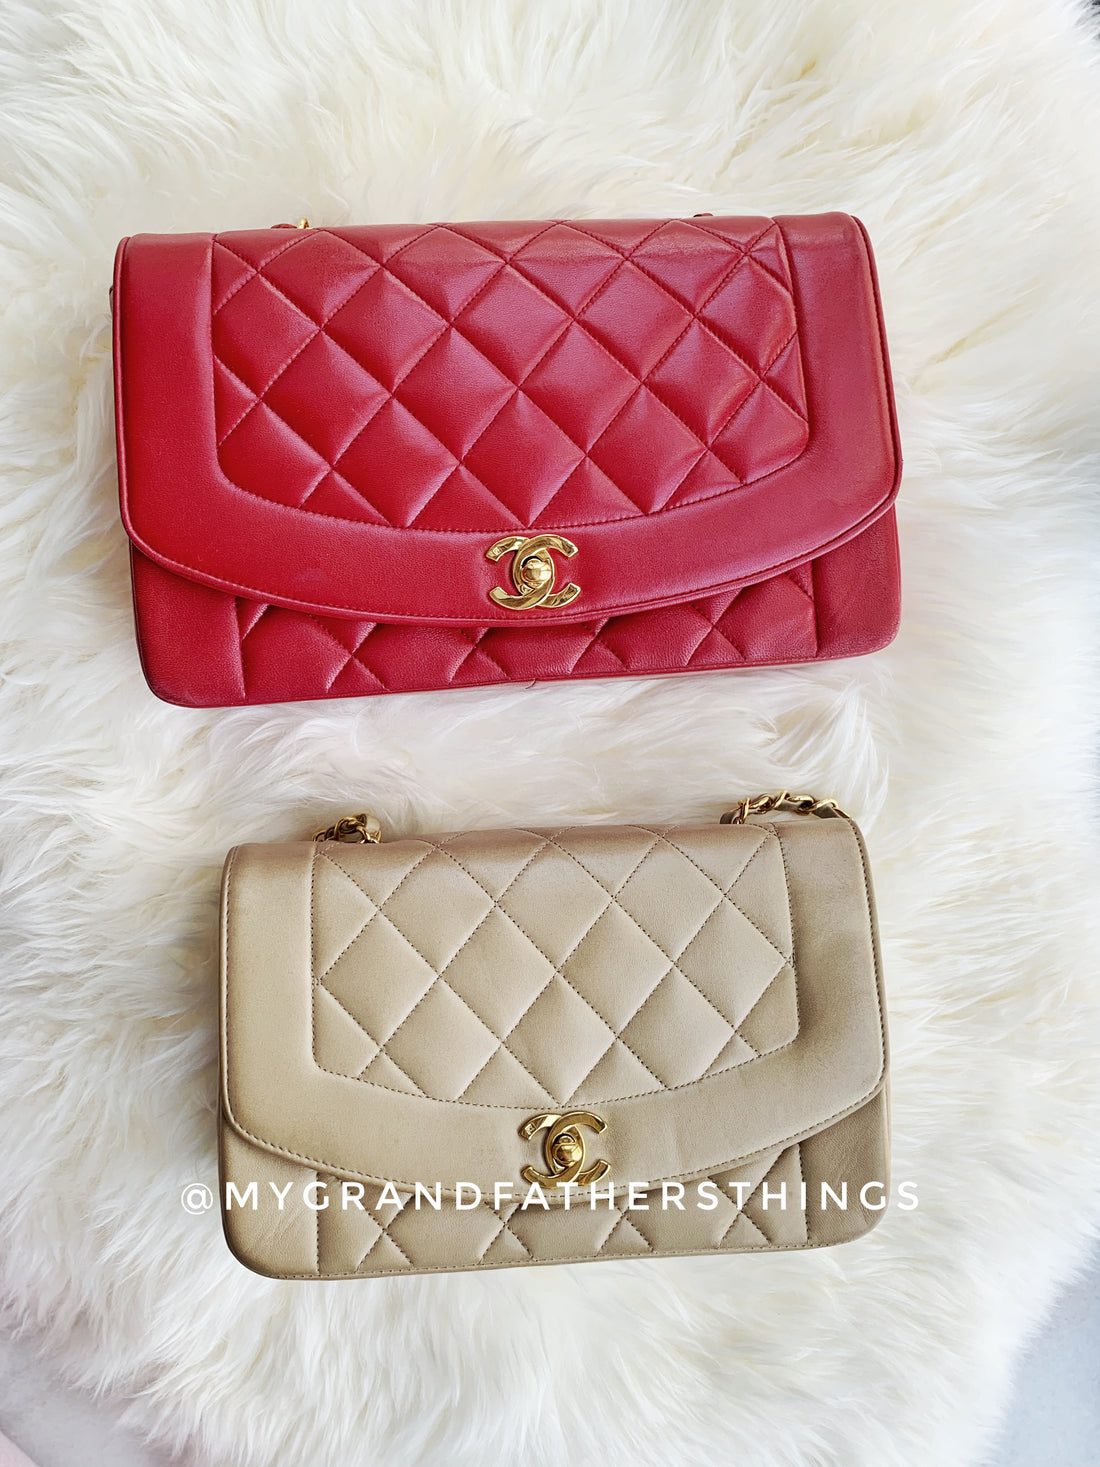 Part 2: What size Chanel Diana bag should I buy?